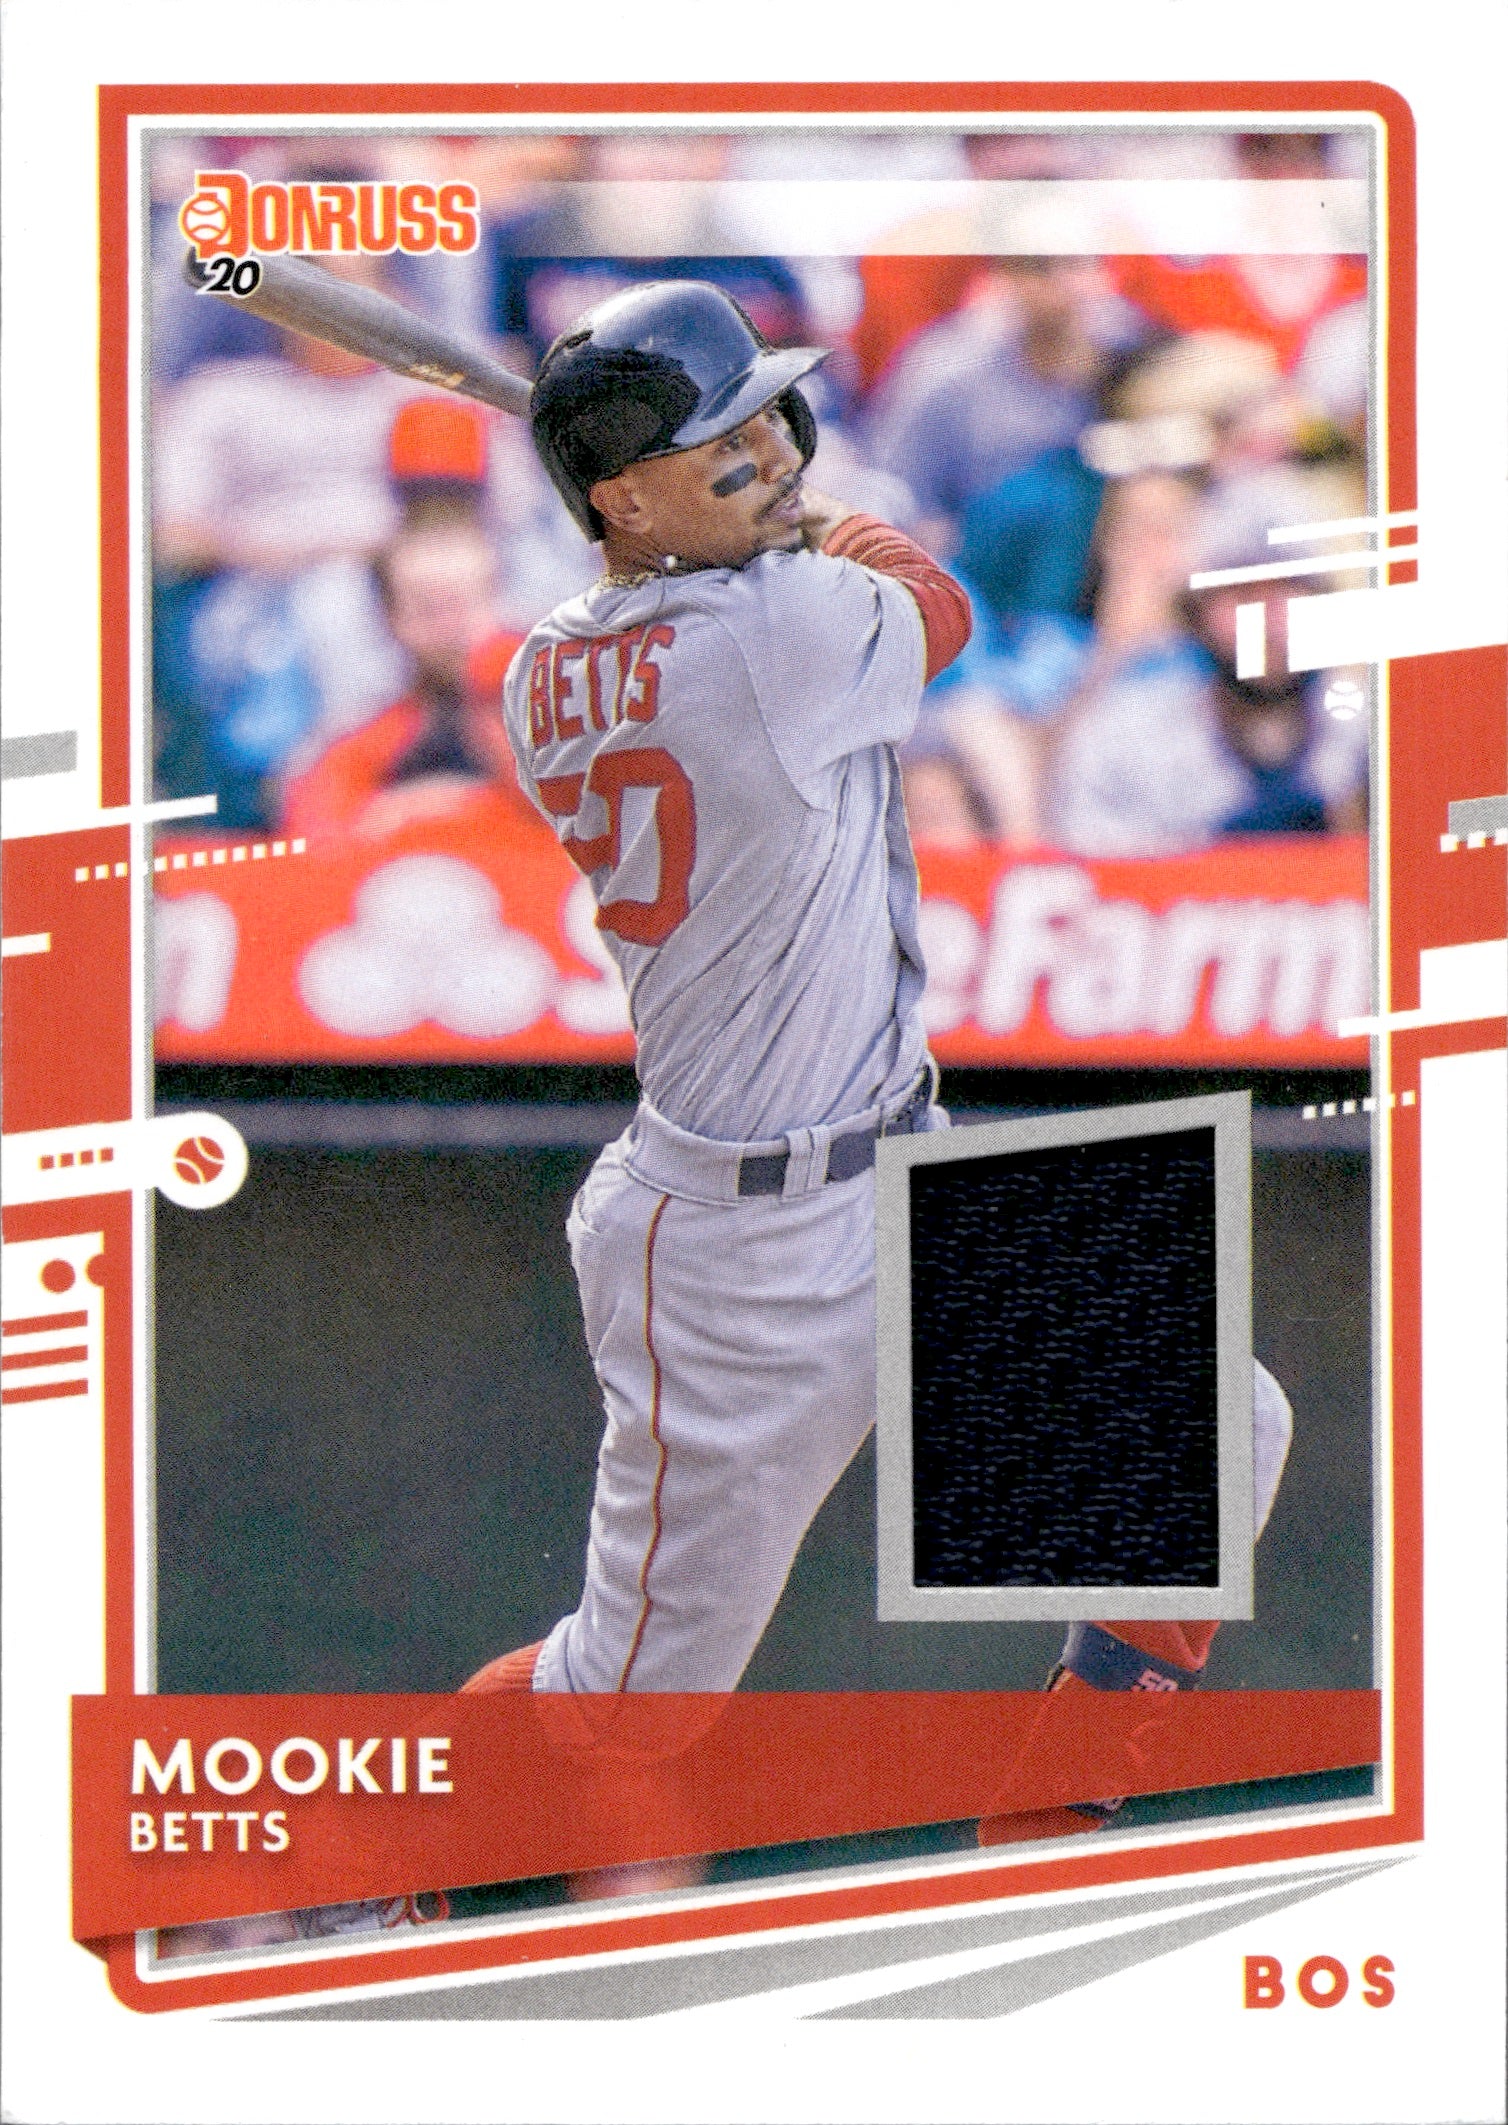 Mookie Betts Red Sox Jersey - collectibles - by owner - sale